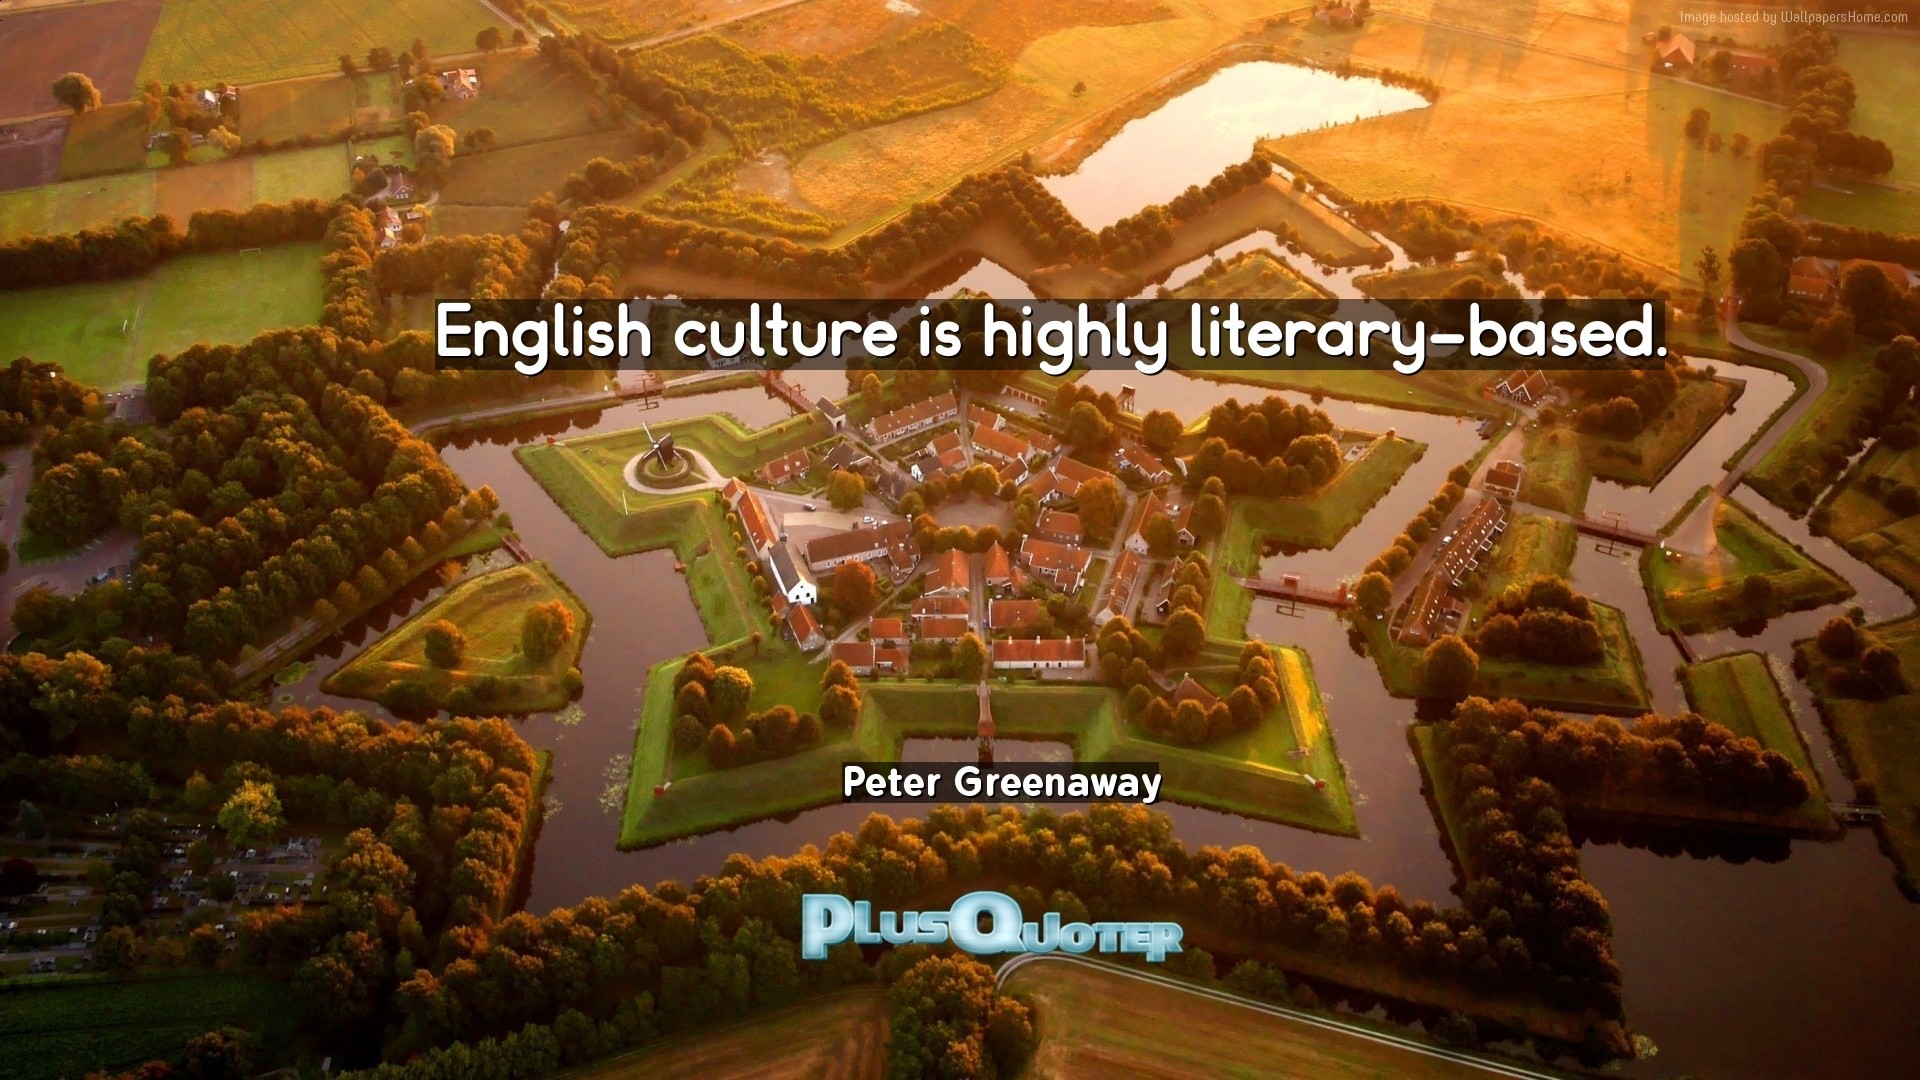 1920x1080 Download Wallpaper with inspirational Quotes- "English culture is highly  literary-based."